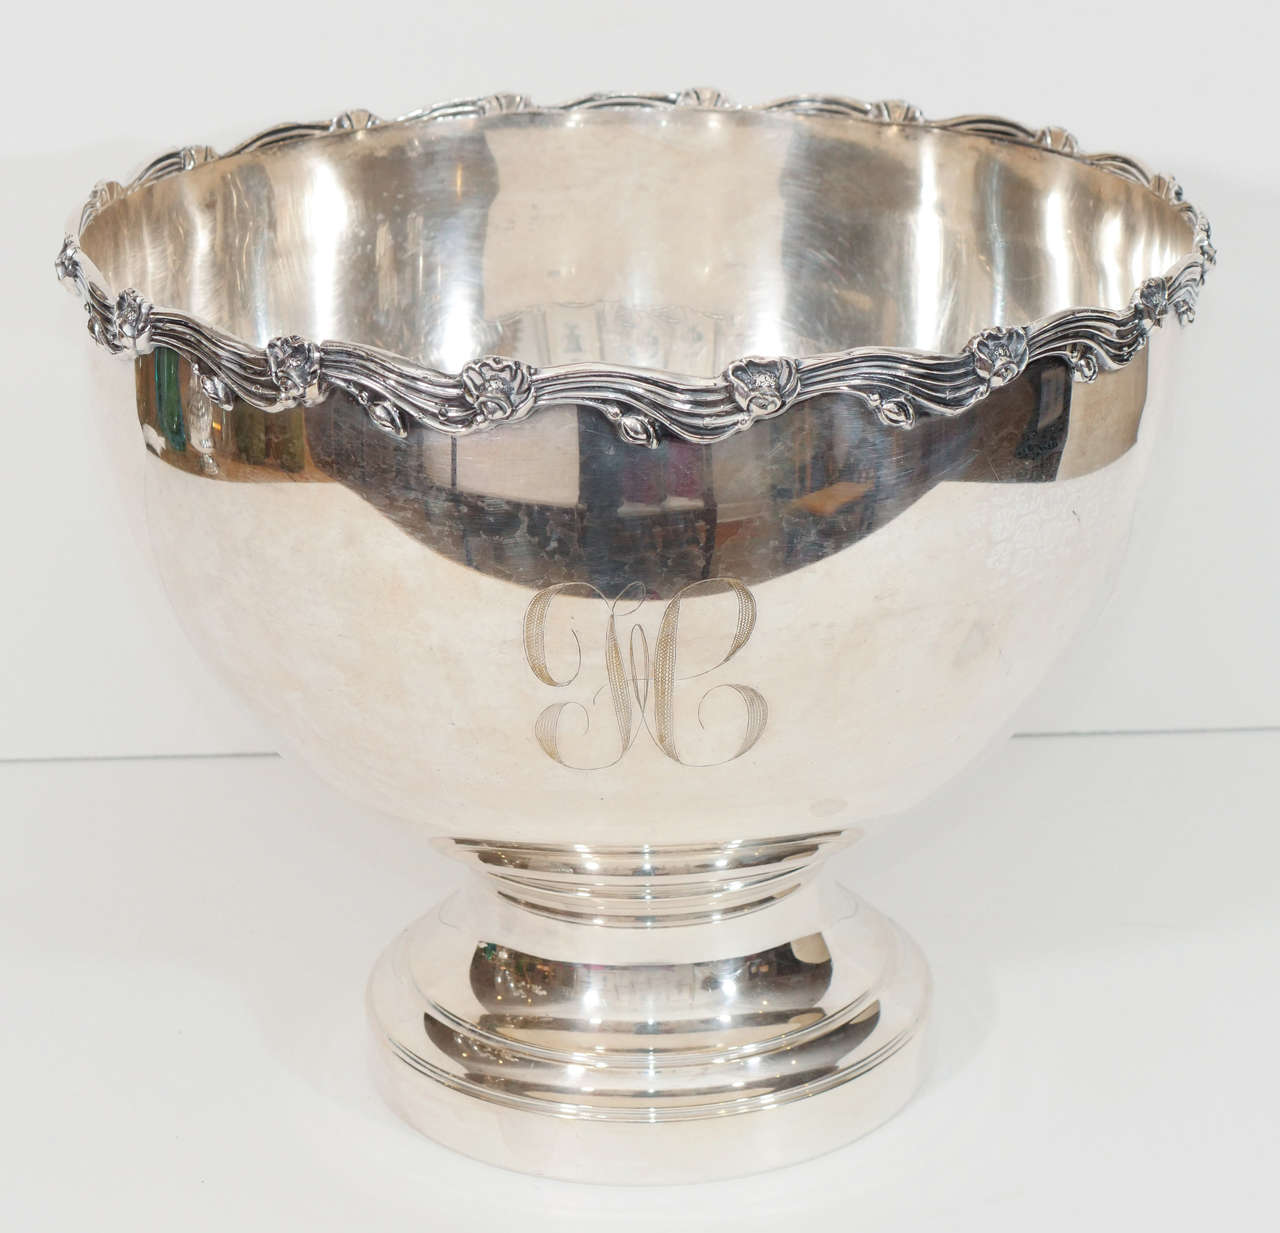 A large silverplate bowl on a round foot, with a floral design along rim. The bowl has a monogram (